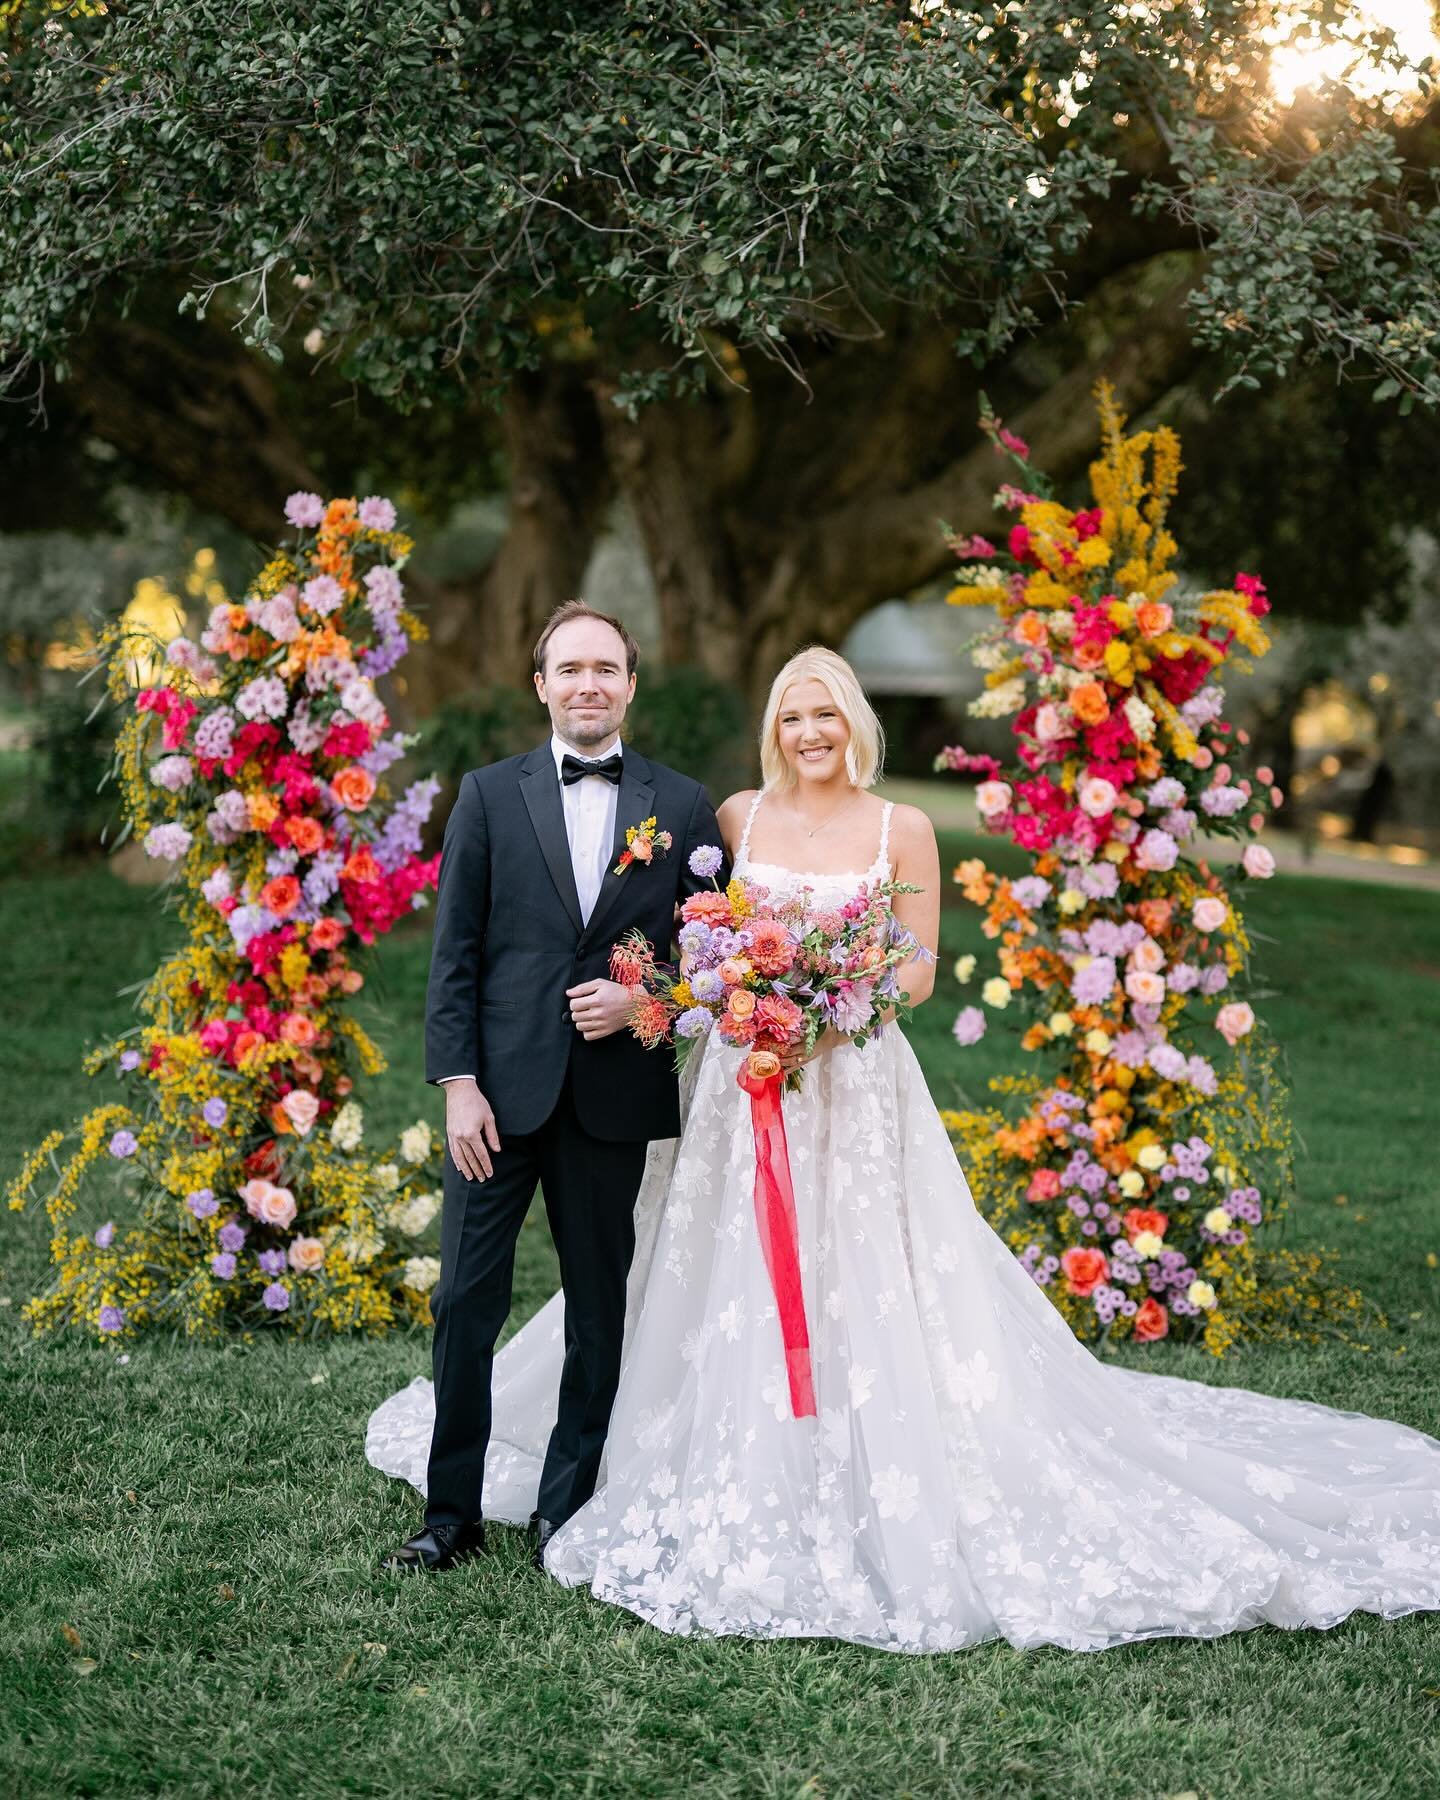 Starting this Tuesday with a vibrant wedding photoshoot sounds absolutely enchanting! The array of colors is simply mesmerizing, don&rsquo;t you think? 💛

D R E A M  T E A M 
Venue | @milagrowinery
Planning + Design | @koralko_
Photography | @mariad